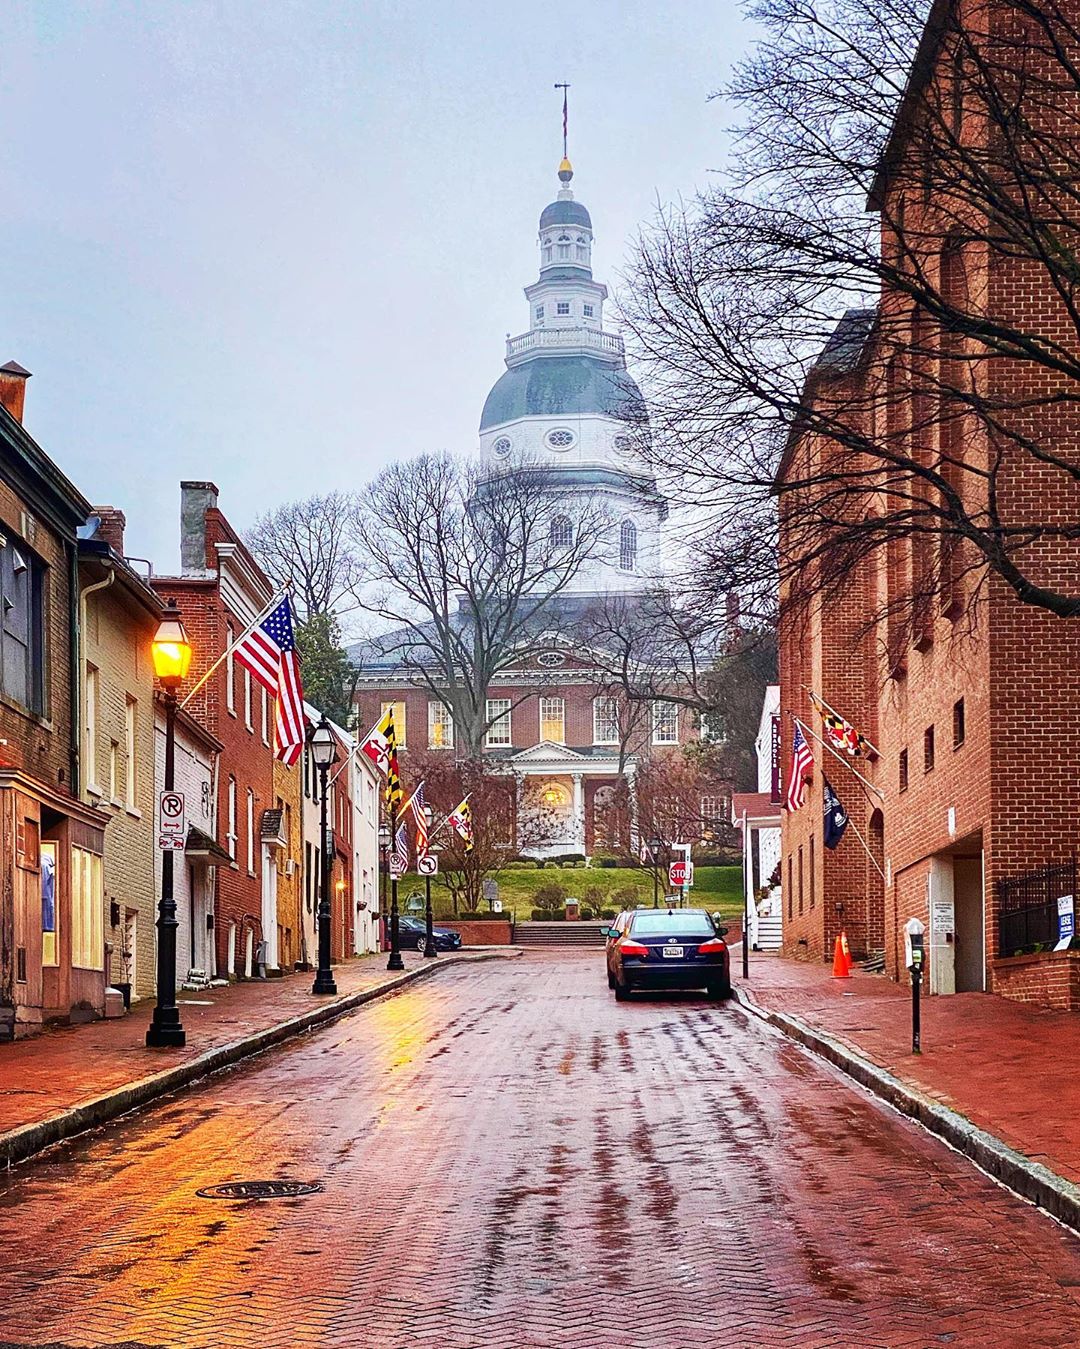 View of the Old State House in Annapolis, MD from a Historic Brick Street. Photo by Instagram User @lenadrlena